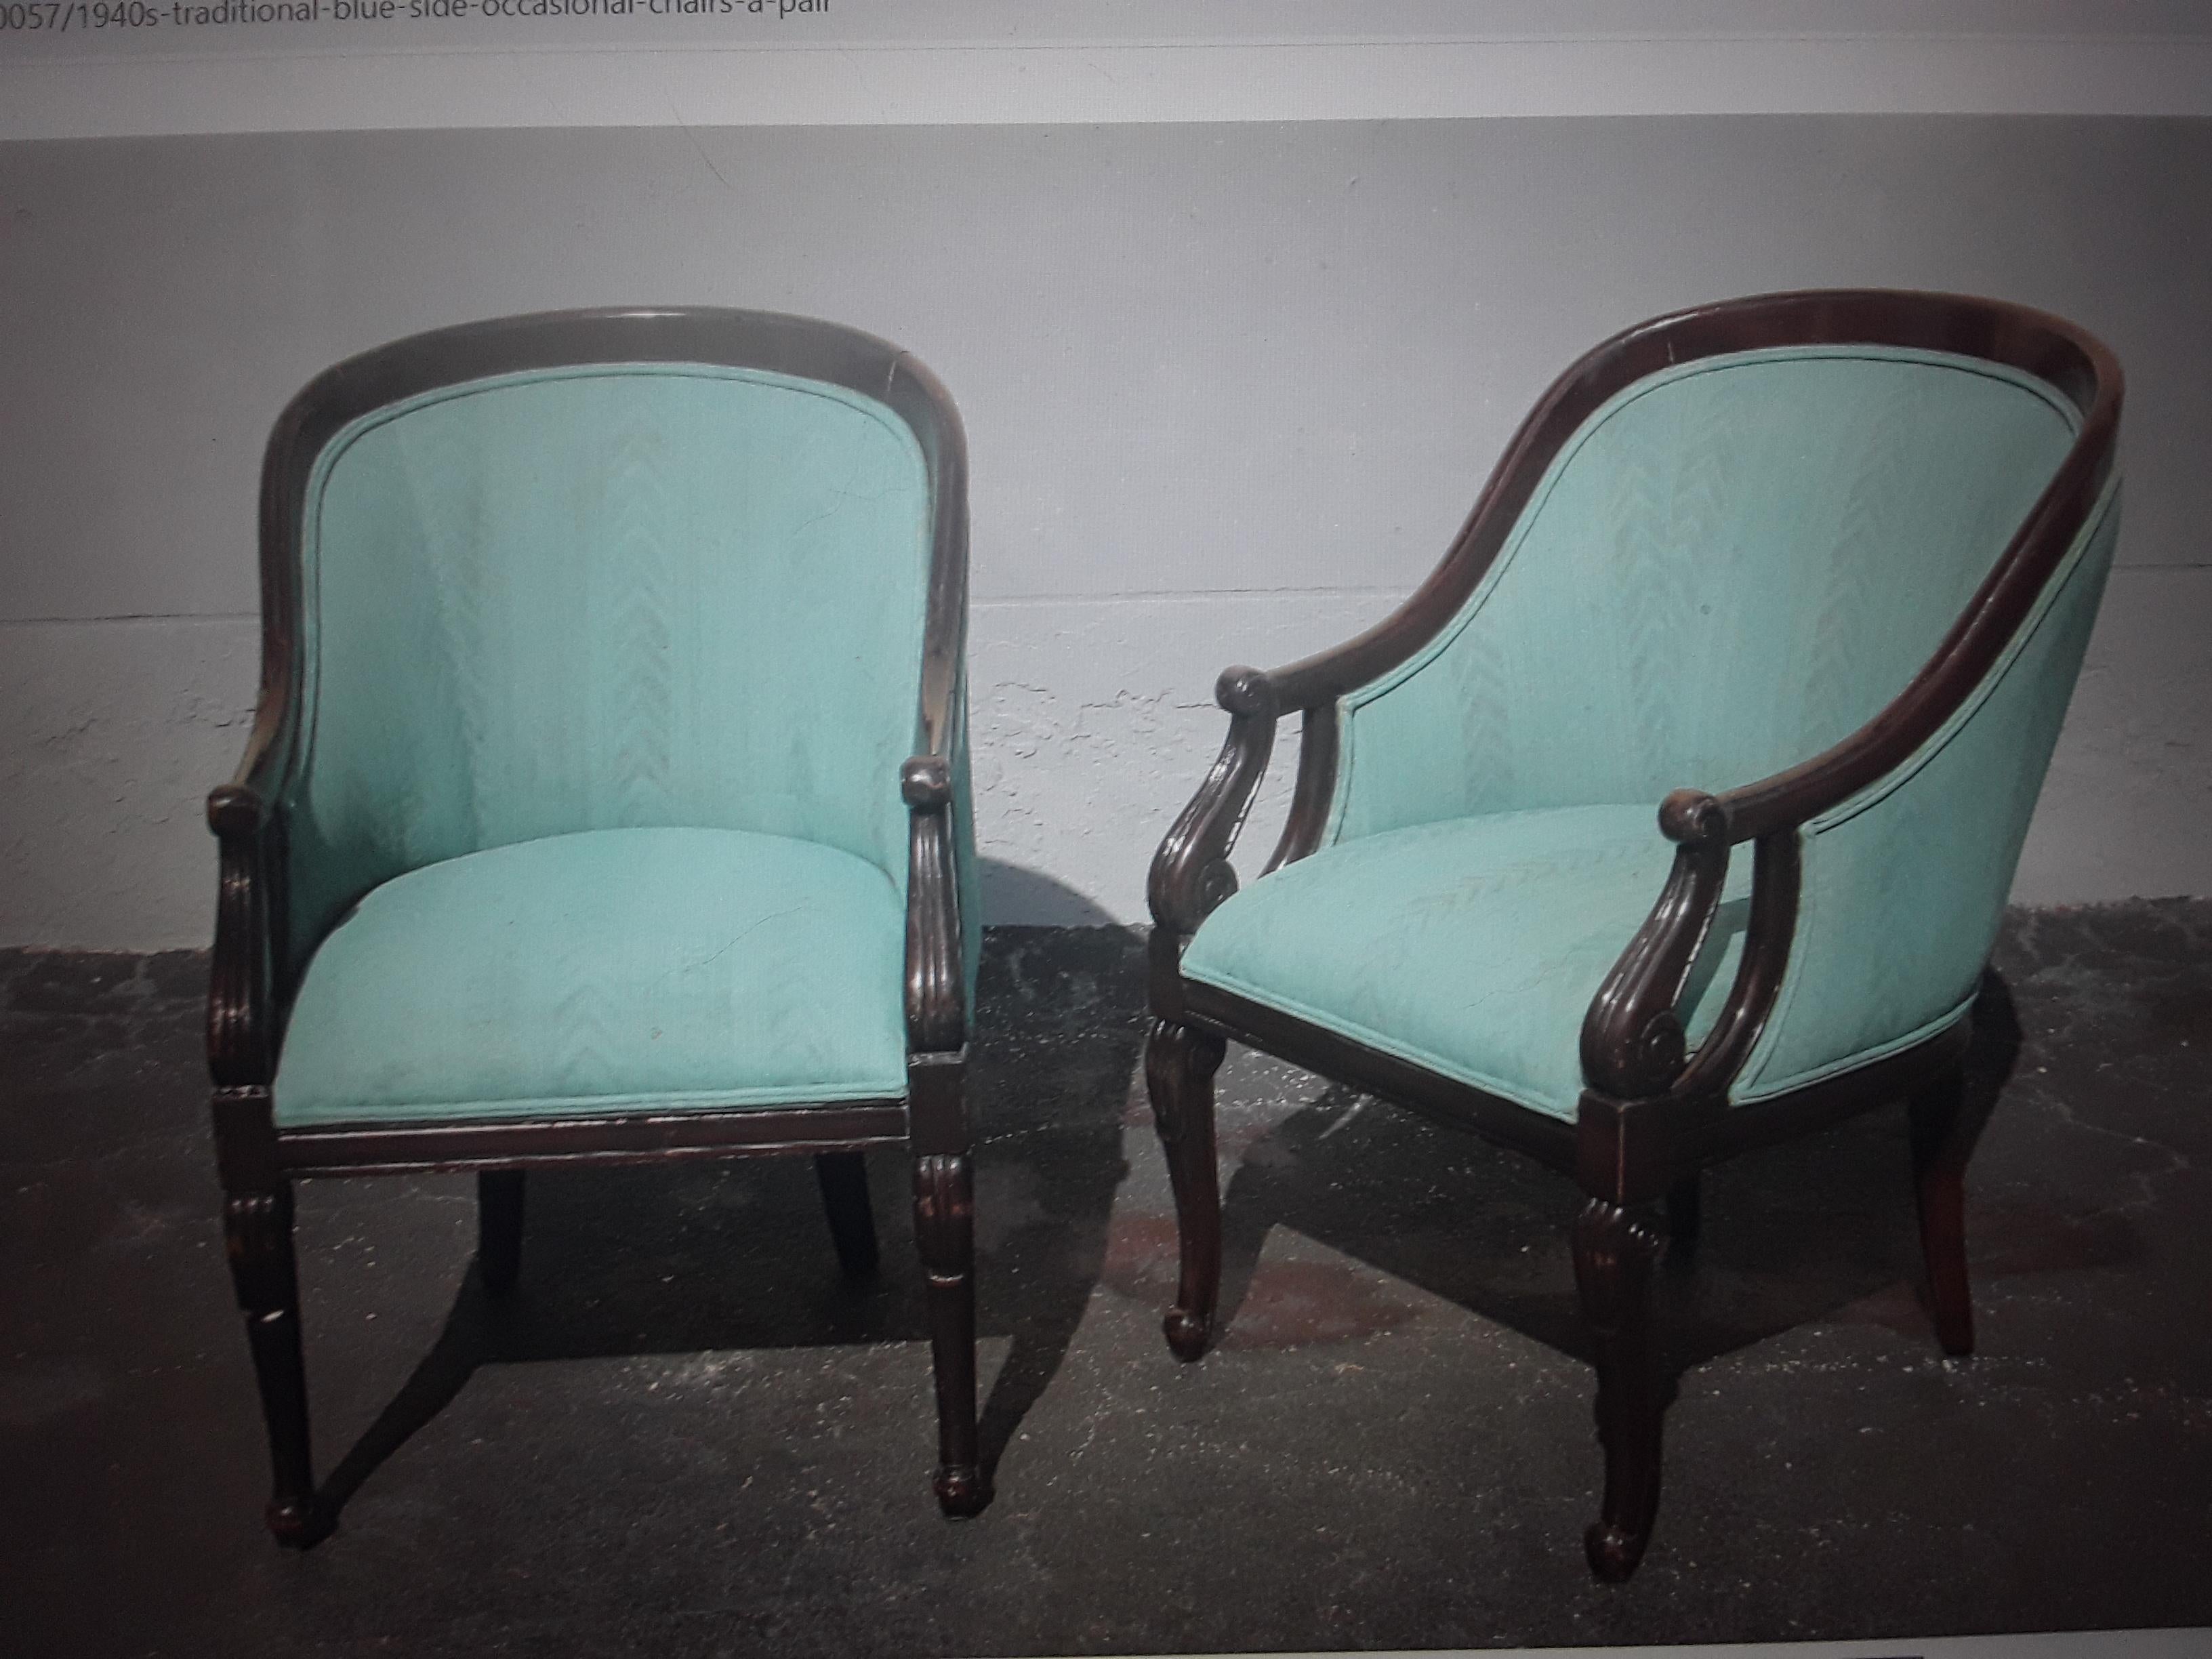 Hollywood Regency Pair 1940's Traditional - Blue - Carved Accent/ Occasional/ Side Chairs For Sale